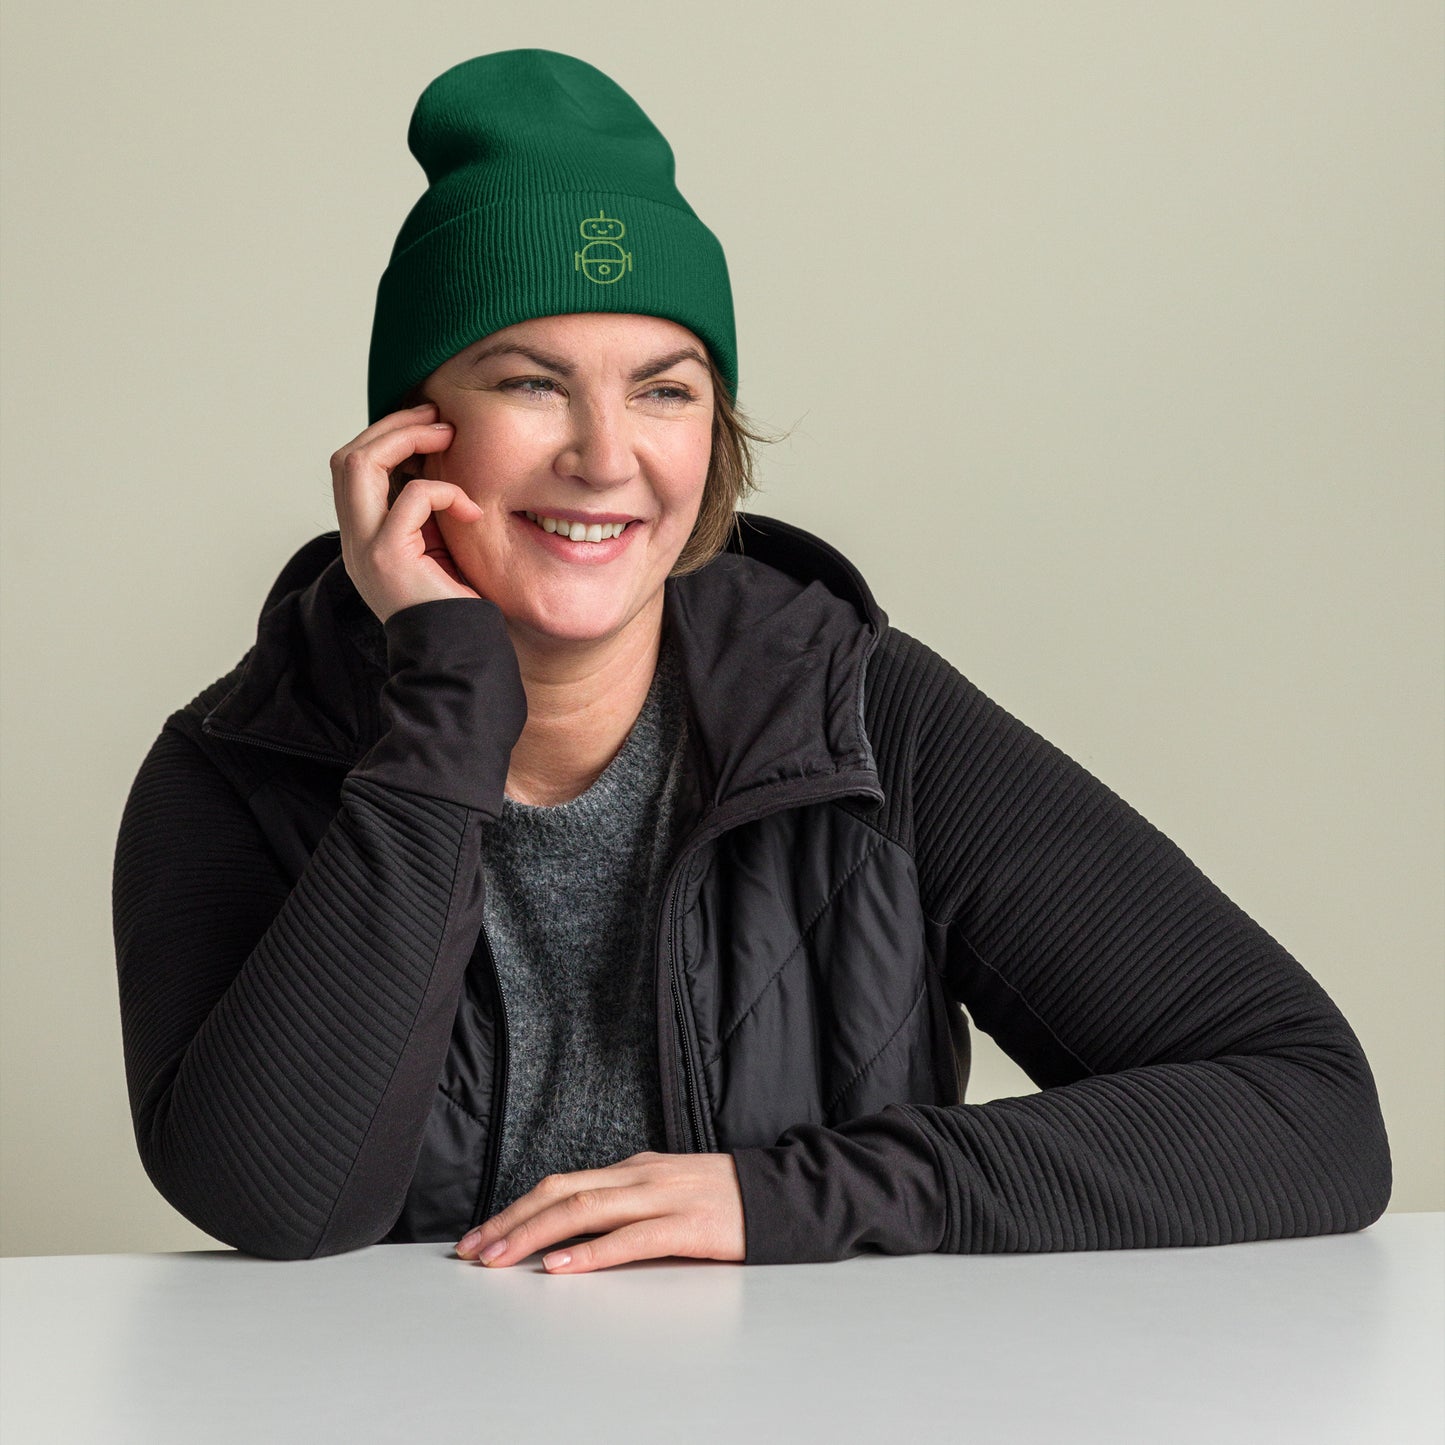 Women with green beanie and Android logo in green